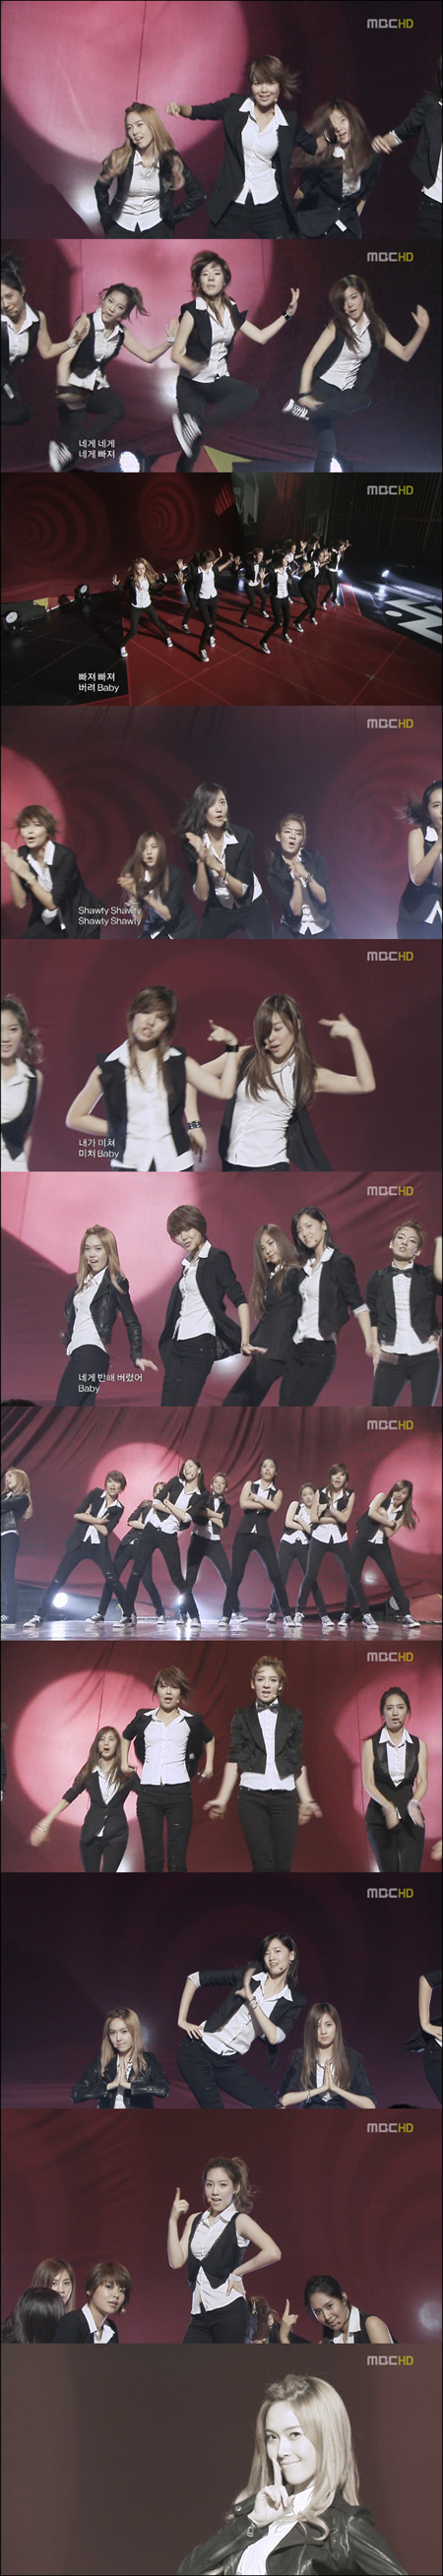 SNSD: Music Core Special